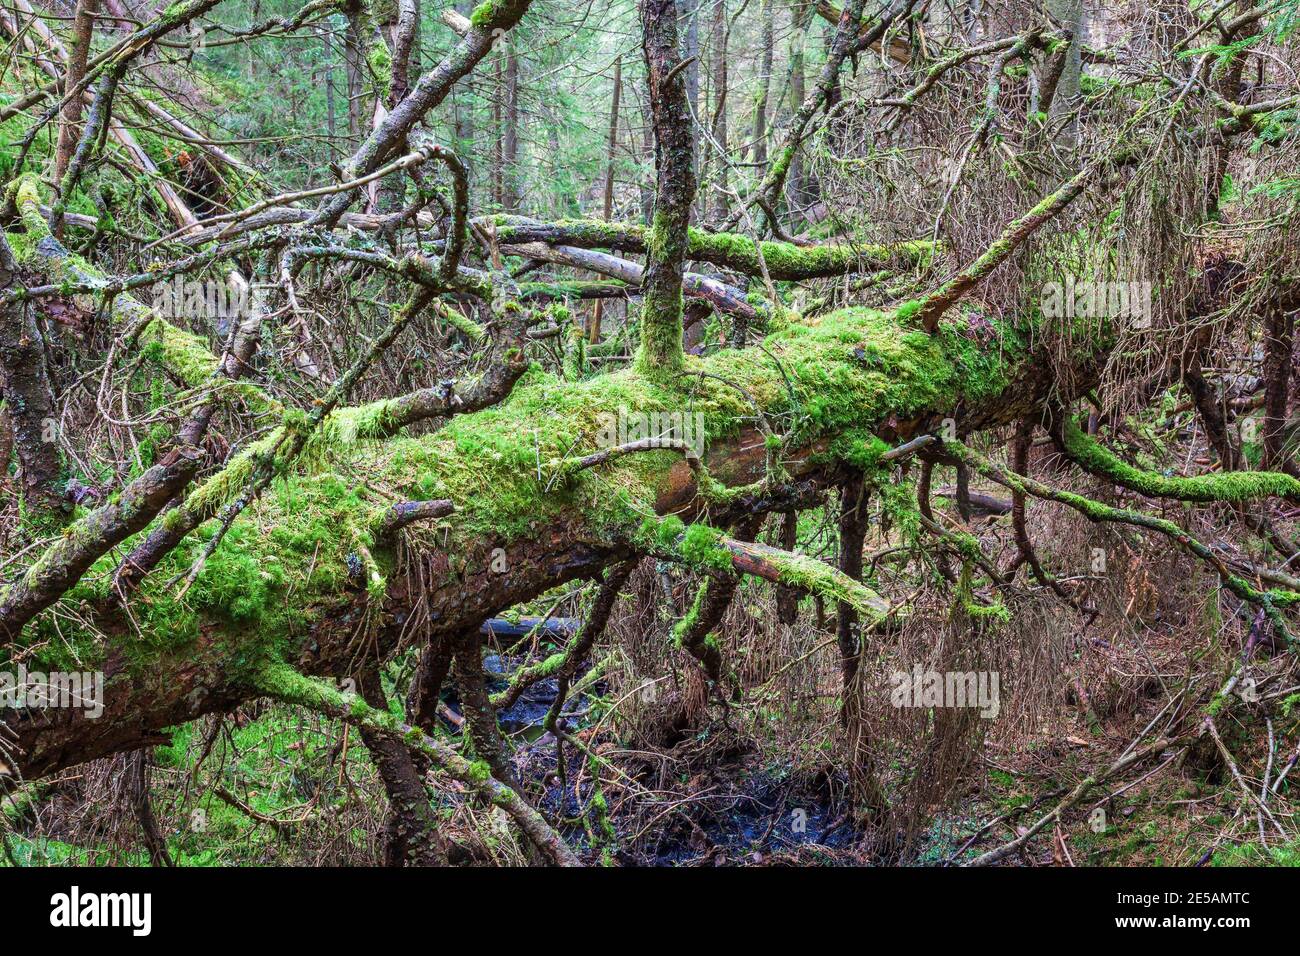 Fallen tree covered with green moss in the forest Stock Photo